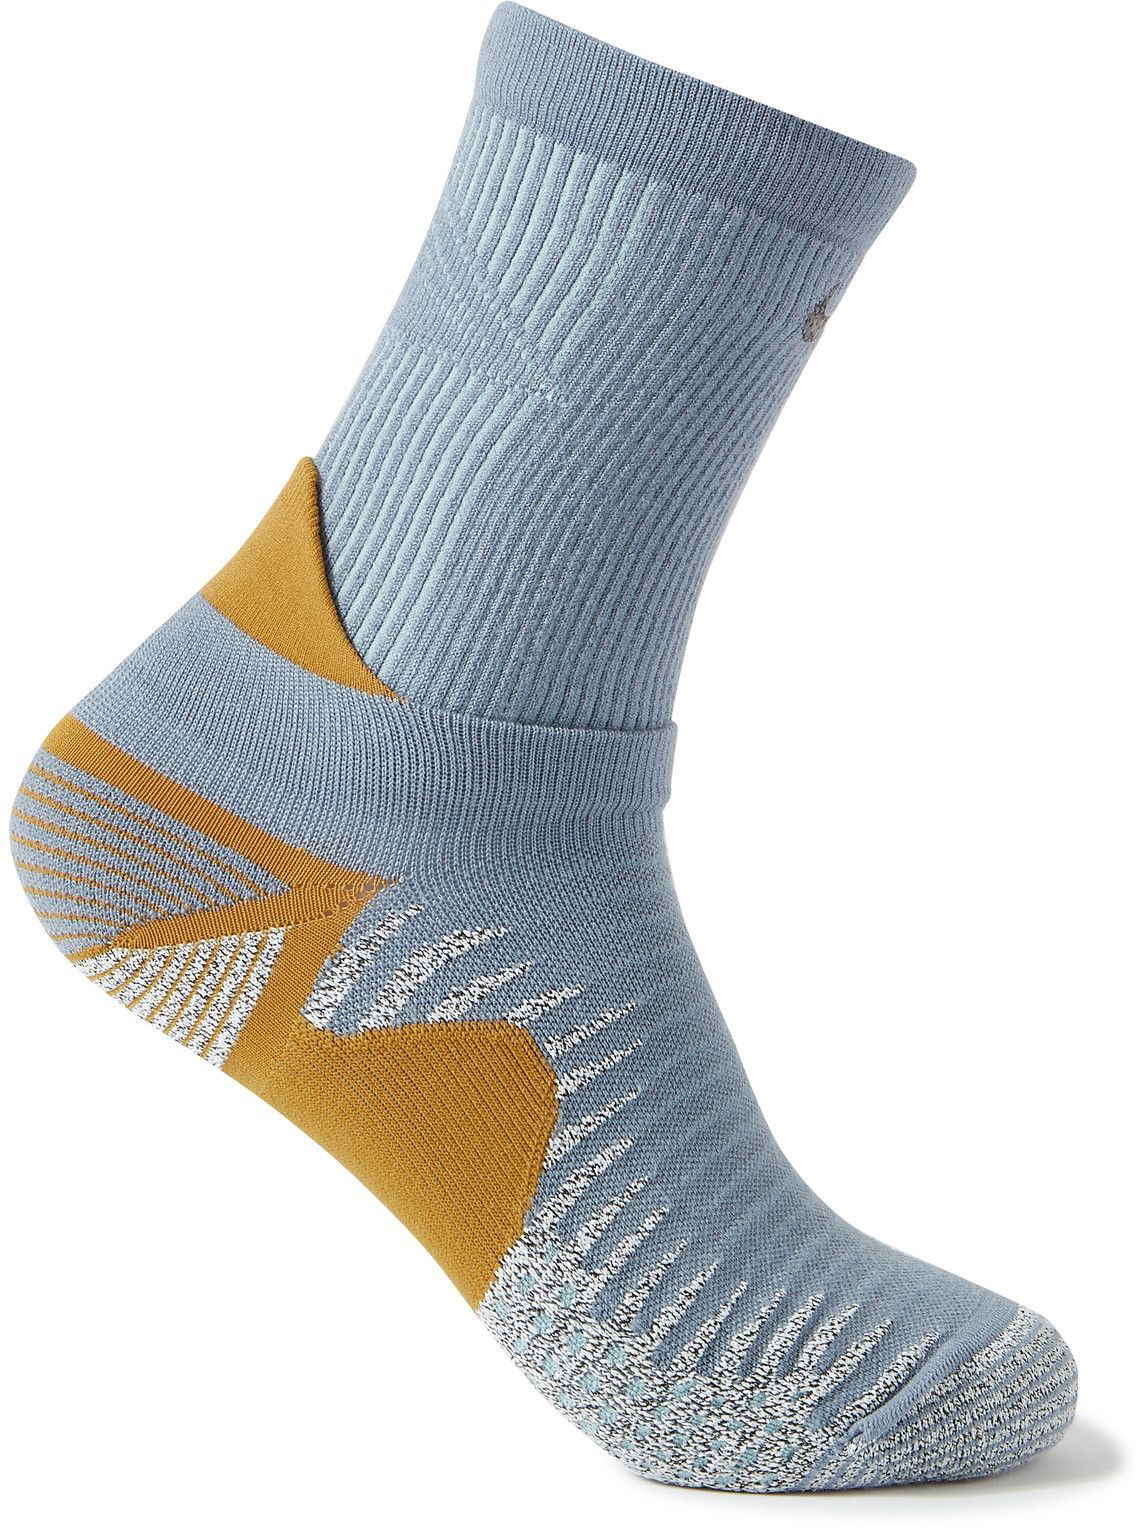 Nike Running Sock | escapeauthority.com